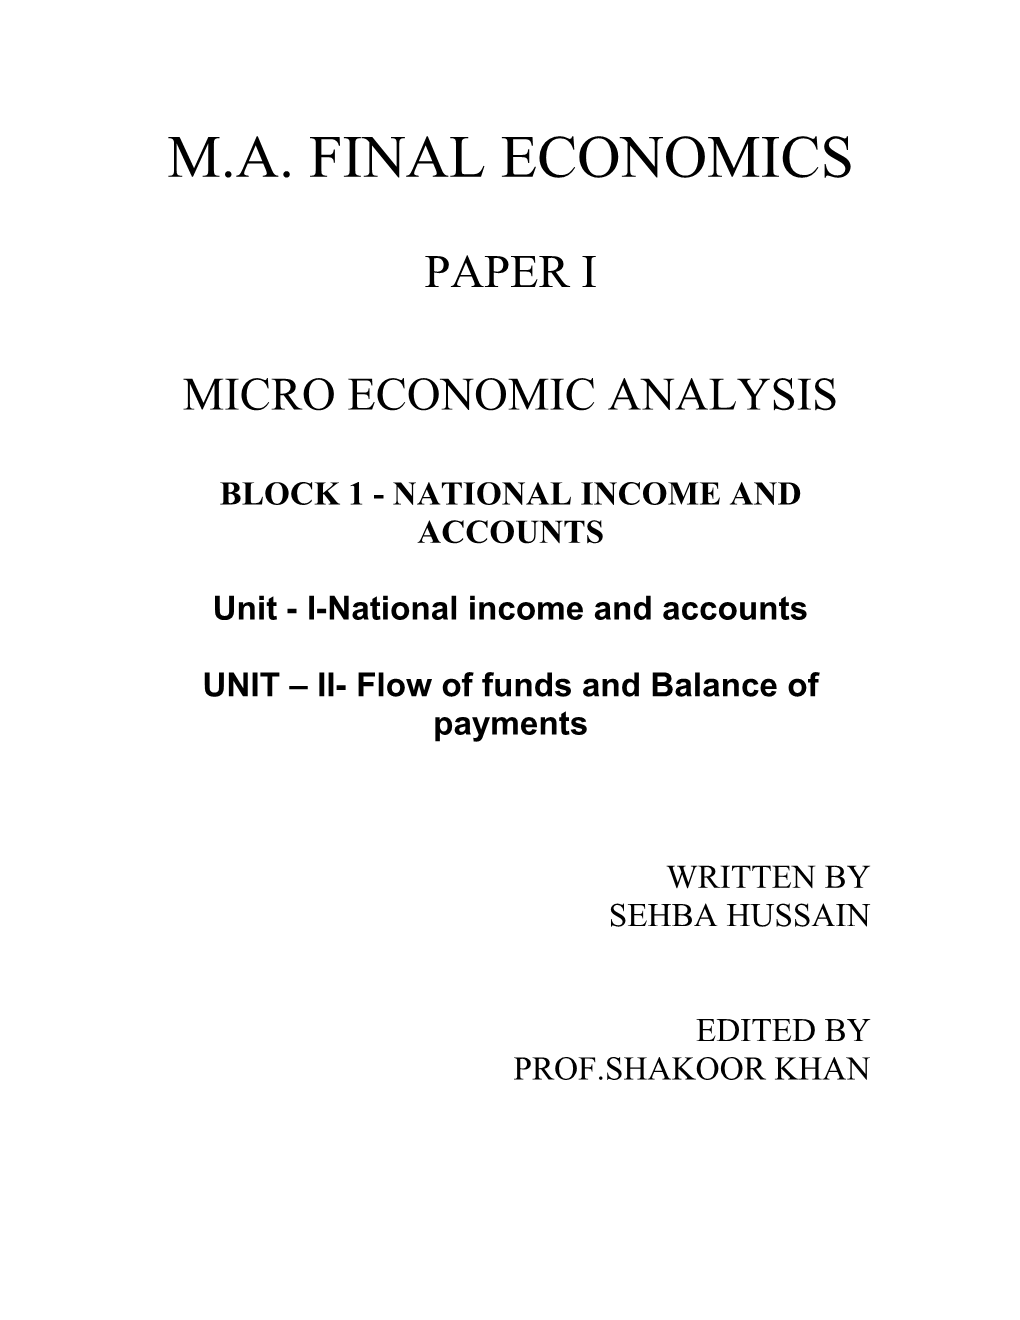 Block 1 - National Income and Accounts